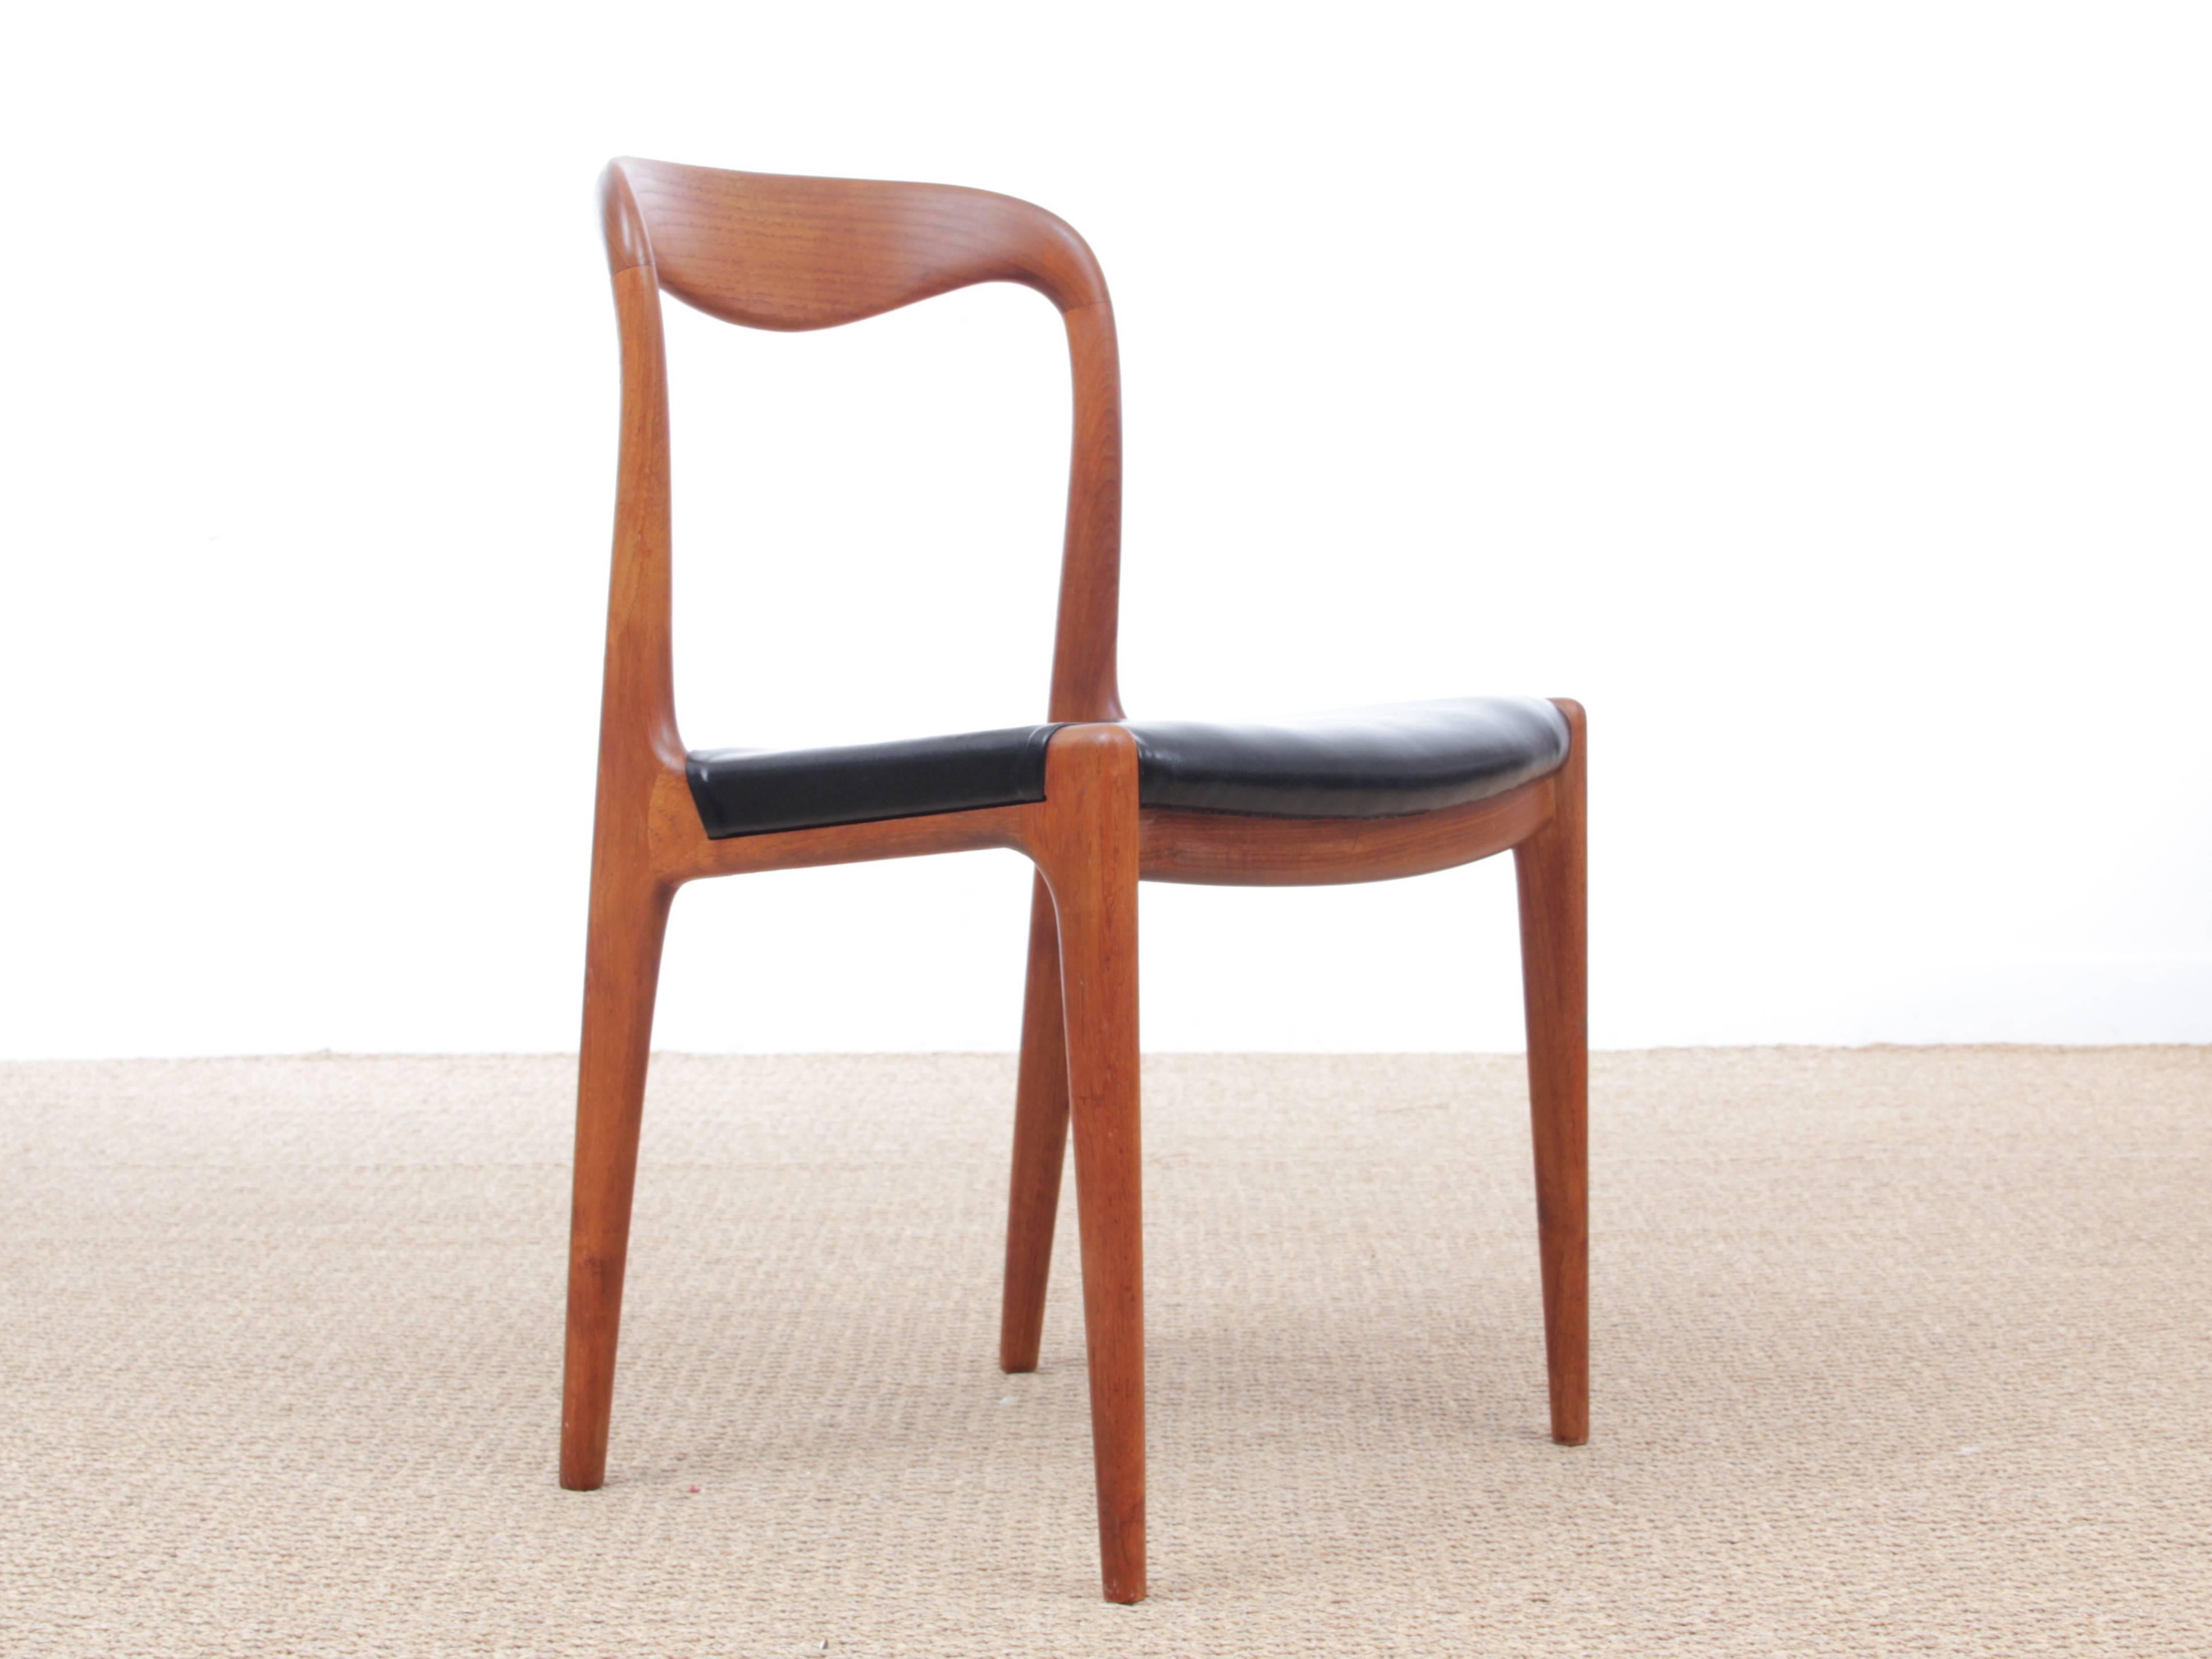 Mid-Century Modern Scandinavian set of ten chairs in teak. Original seats in similar leather. Needed to be reupholstered. New upholstery on demand, leather or fabric: + €220 per chair. Delivery tile 4 weeks.